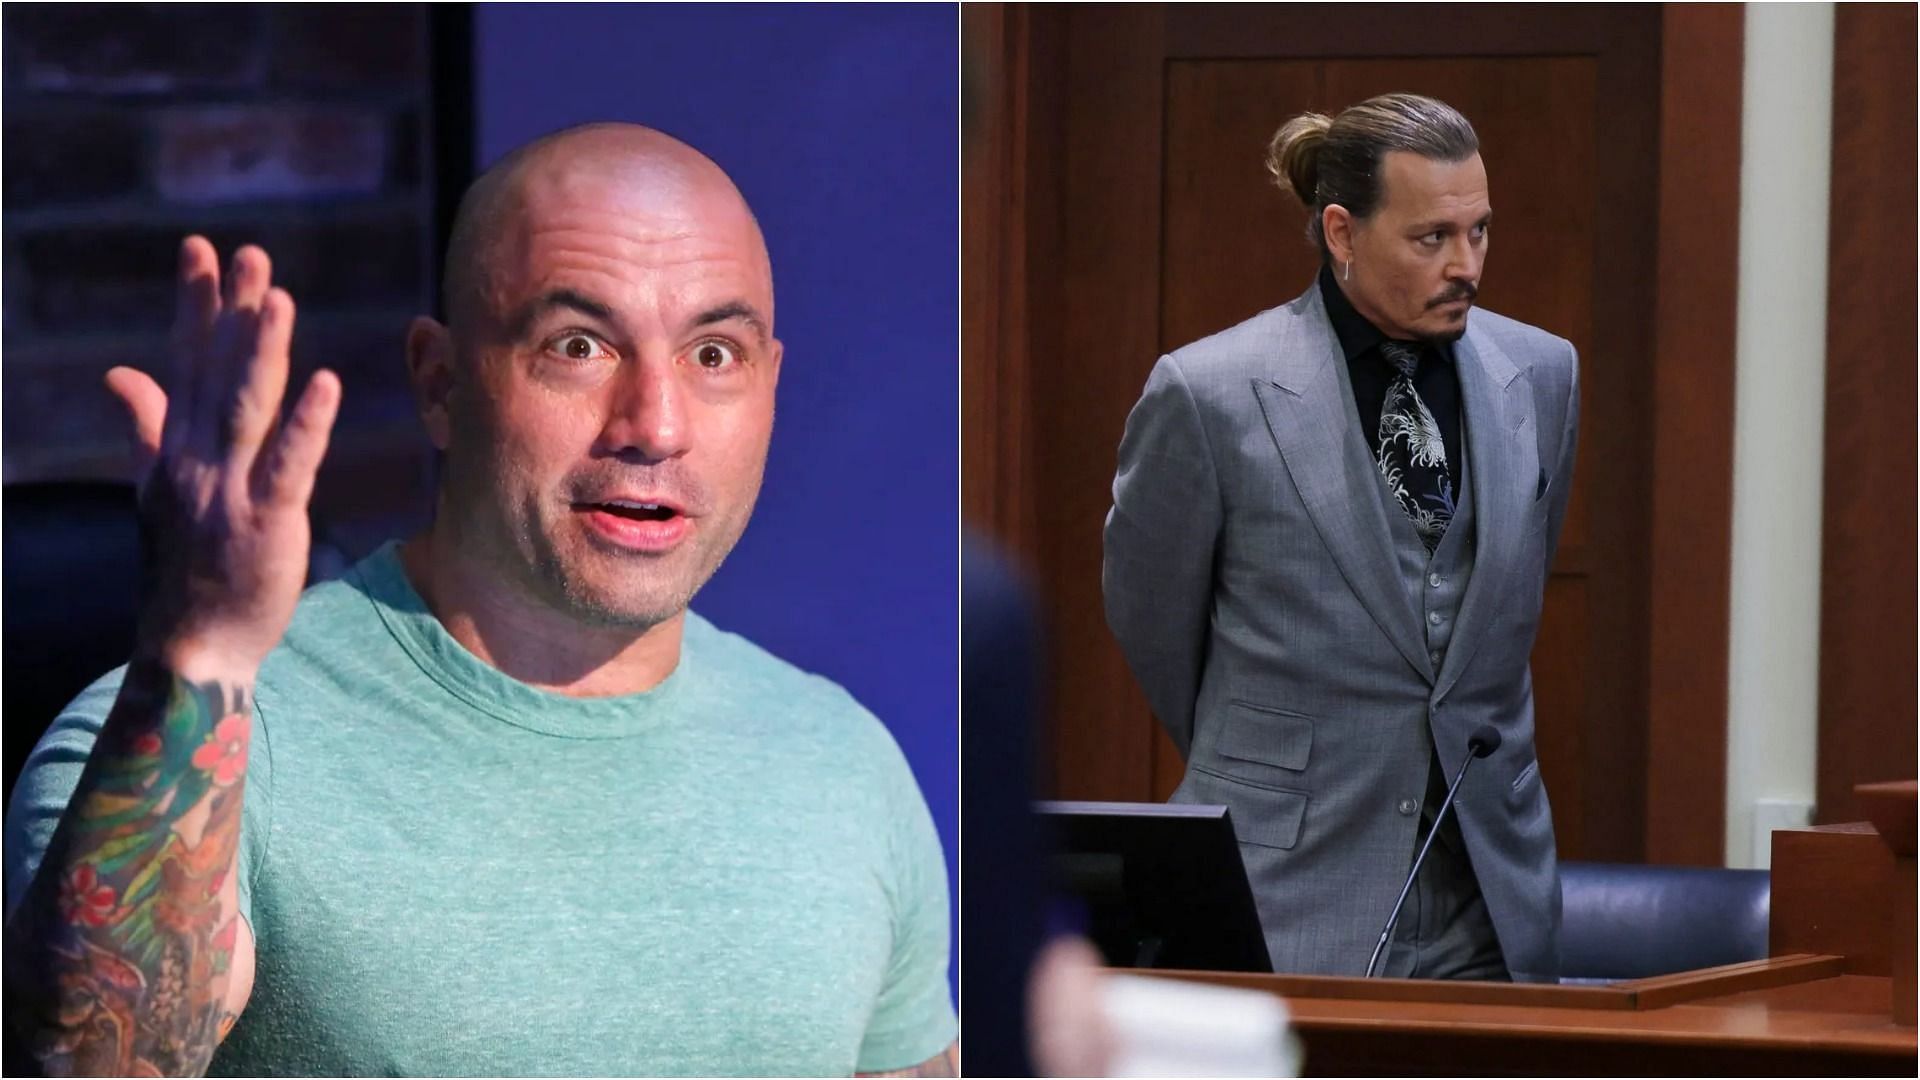 Joe Rogan opens up about Johnny Depp trial (Image via Vivian Zink/Syfy/NBCU Photo Bank/NBCUniversal/Getty Images, and Velyn Hockstein/POOL/AFP/Getty Images)